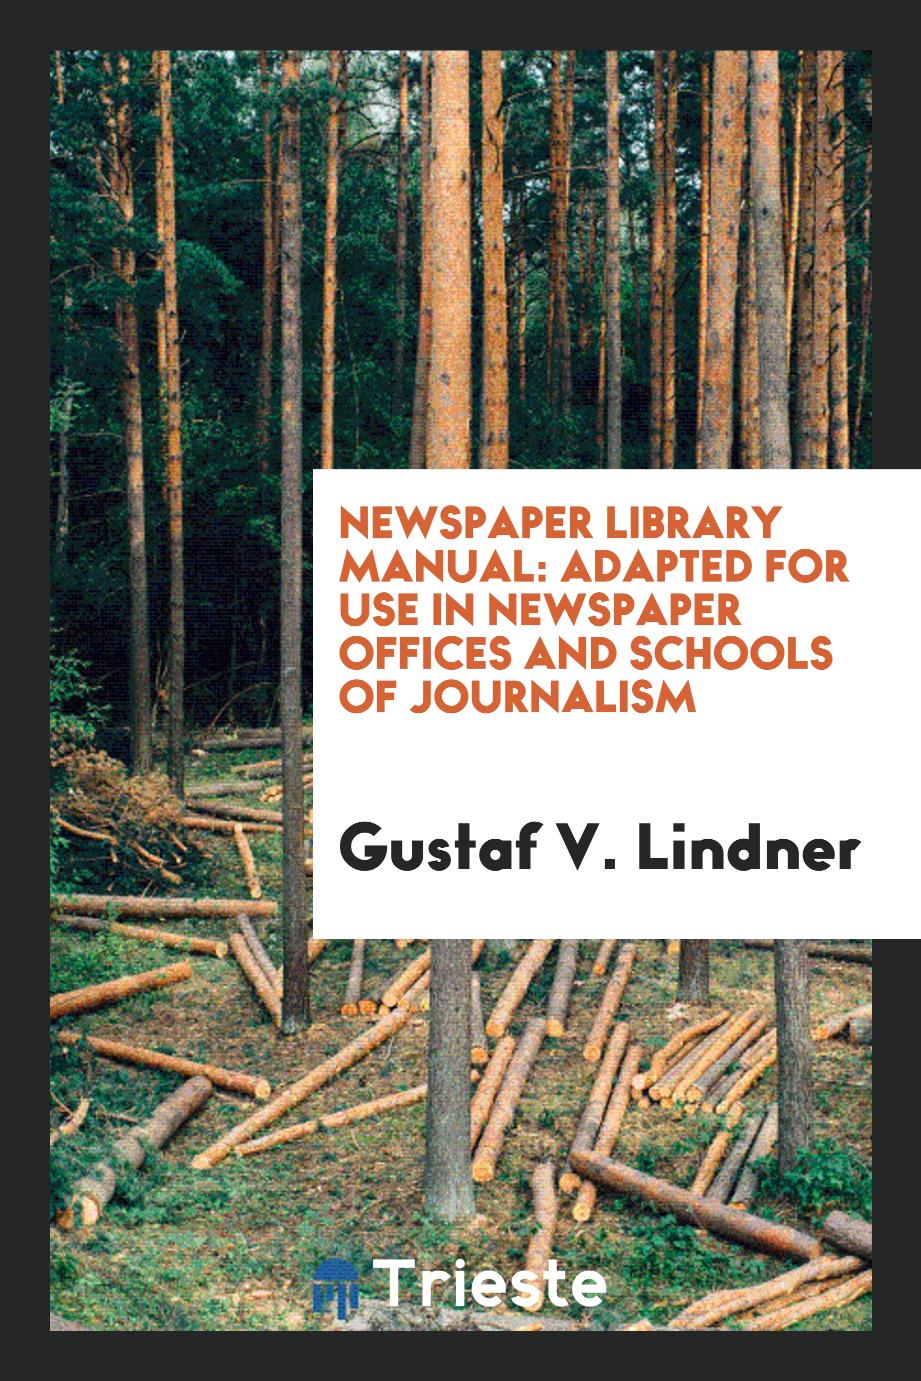 Newspaper Library Manual: Adapted for Use in Newspaper Offices and Schools of Journalism